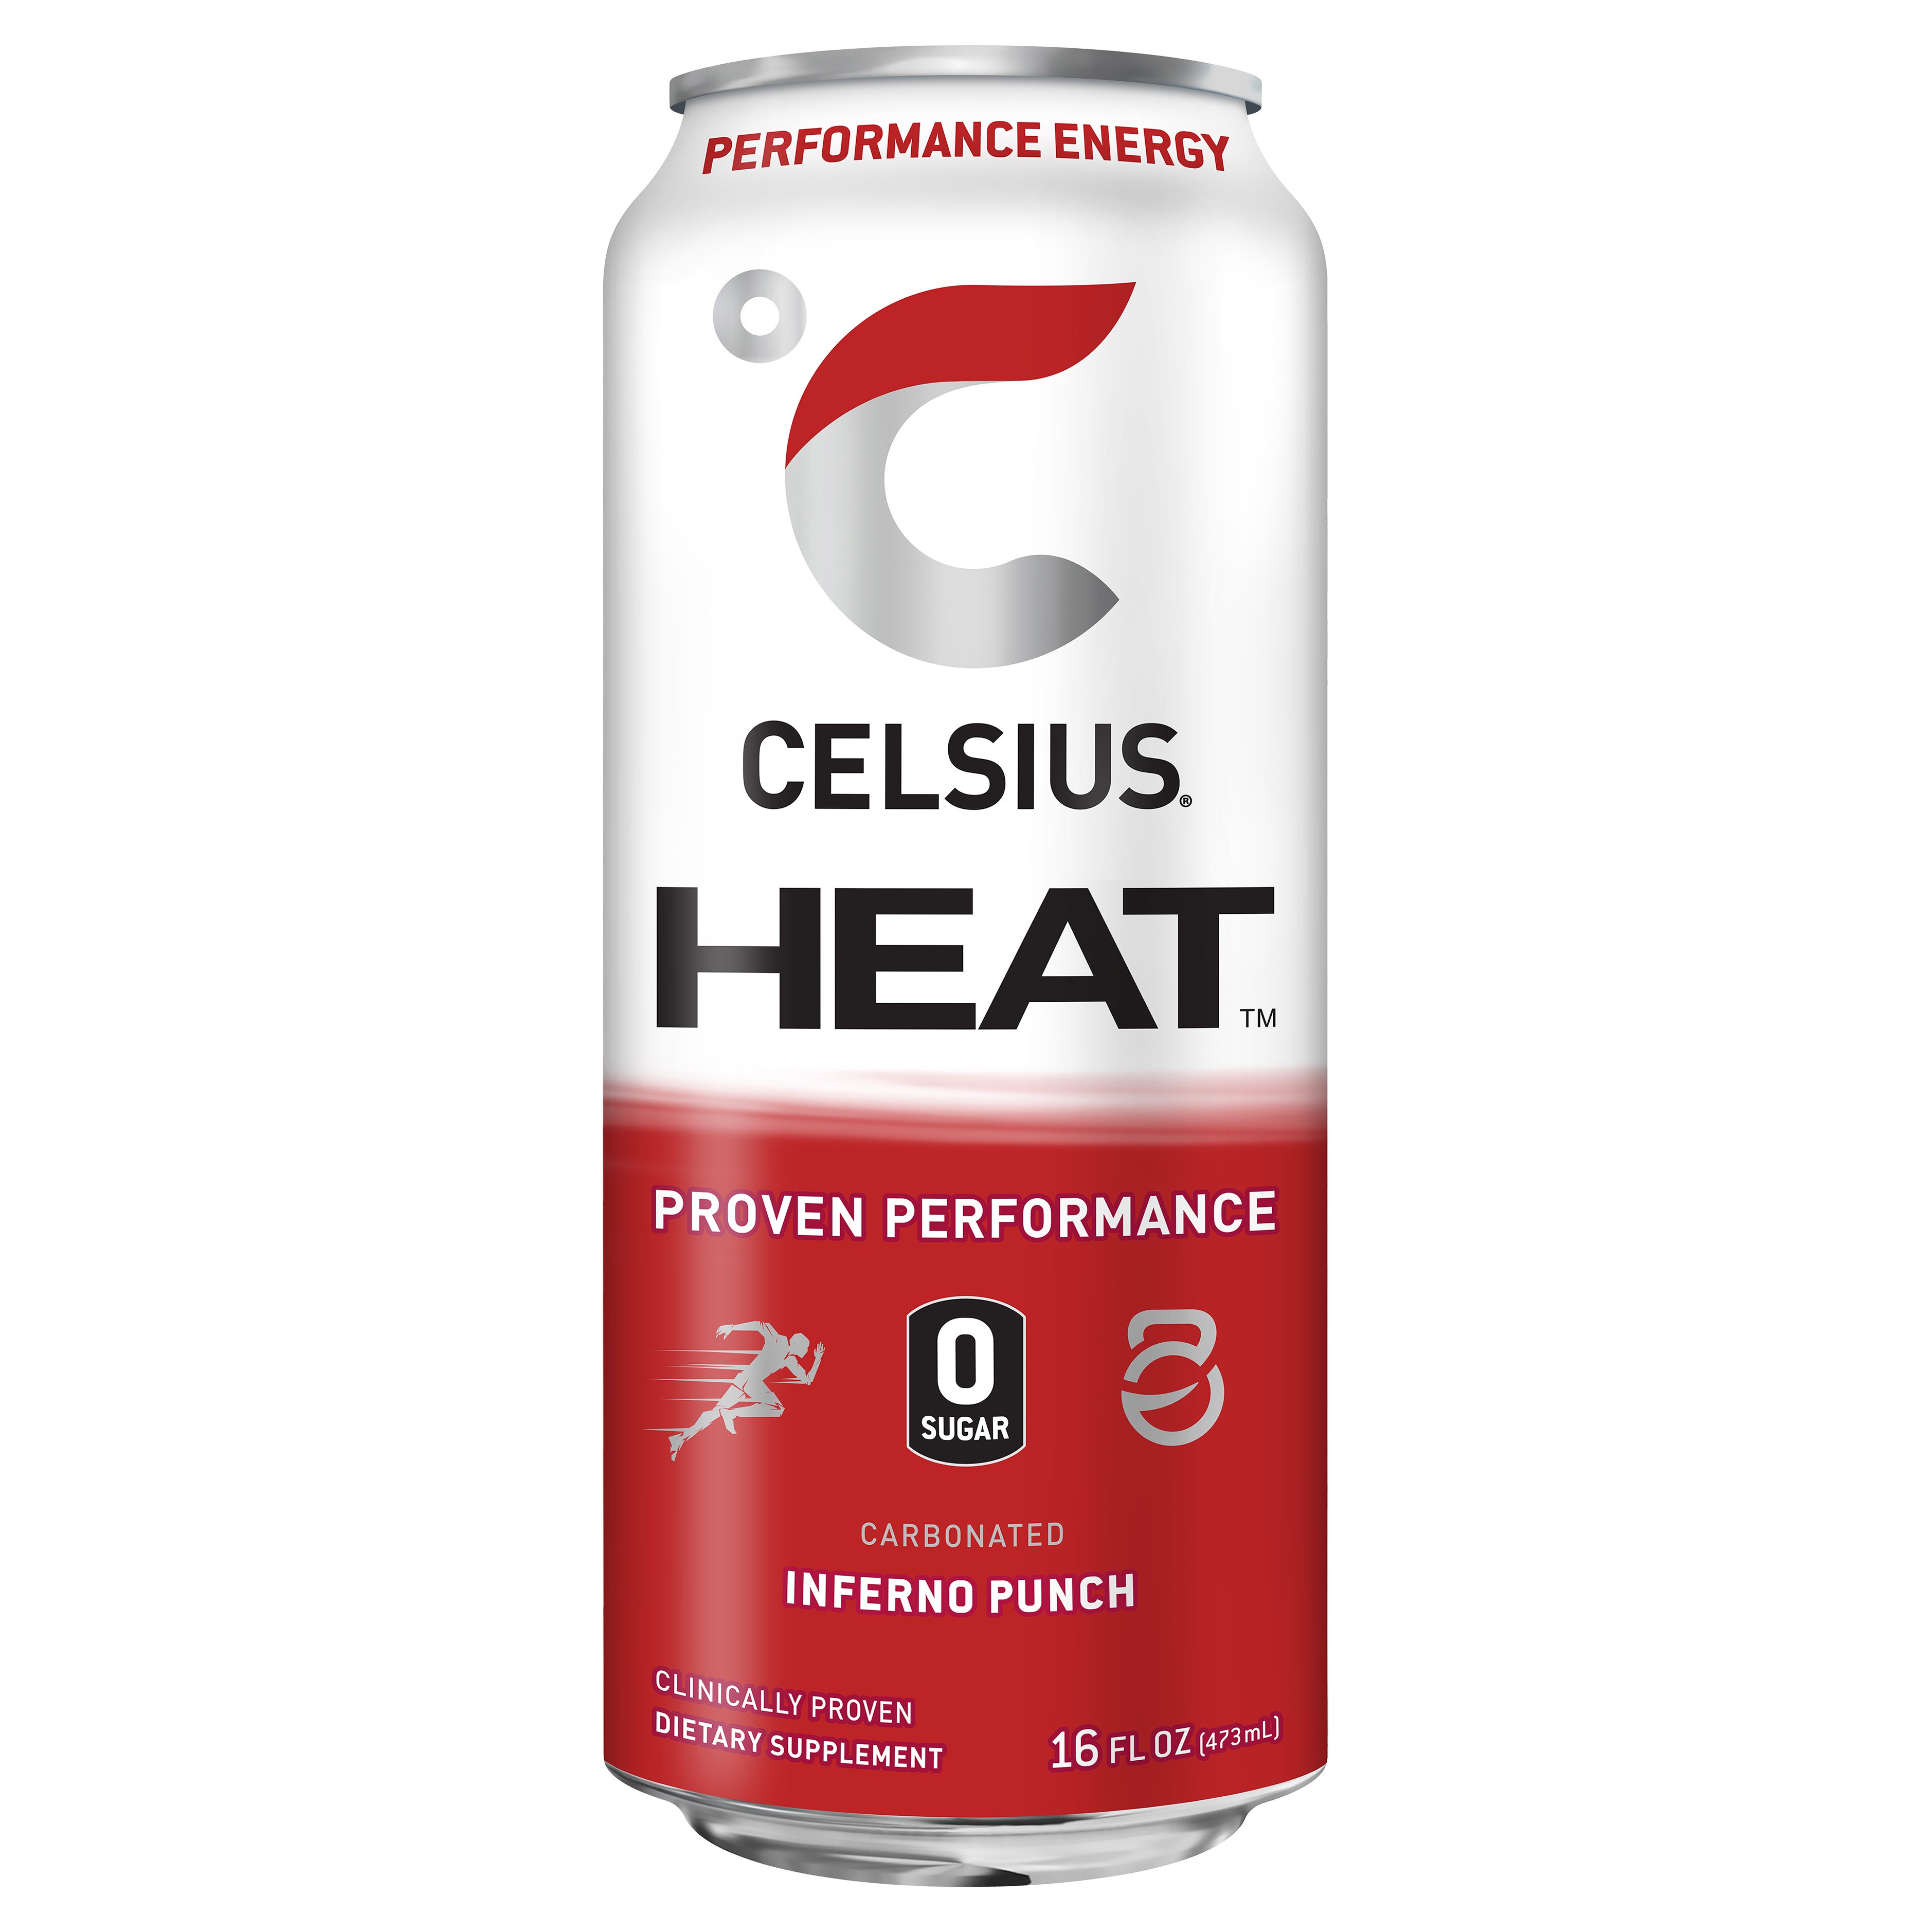 Celsius CELSIUS HEAT Inferno Punch Performance Energy Drink (16oz Can) - Shop Diet & Fitness at